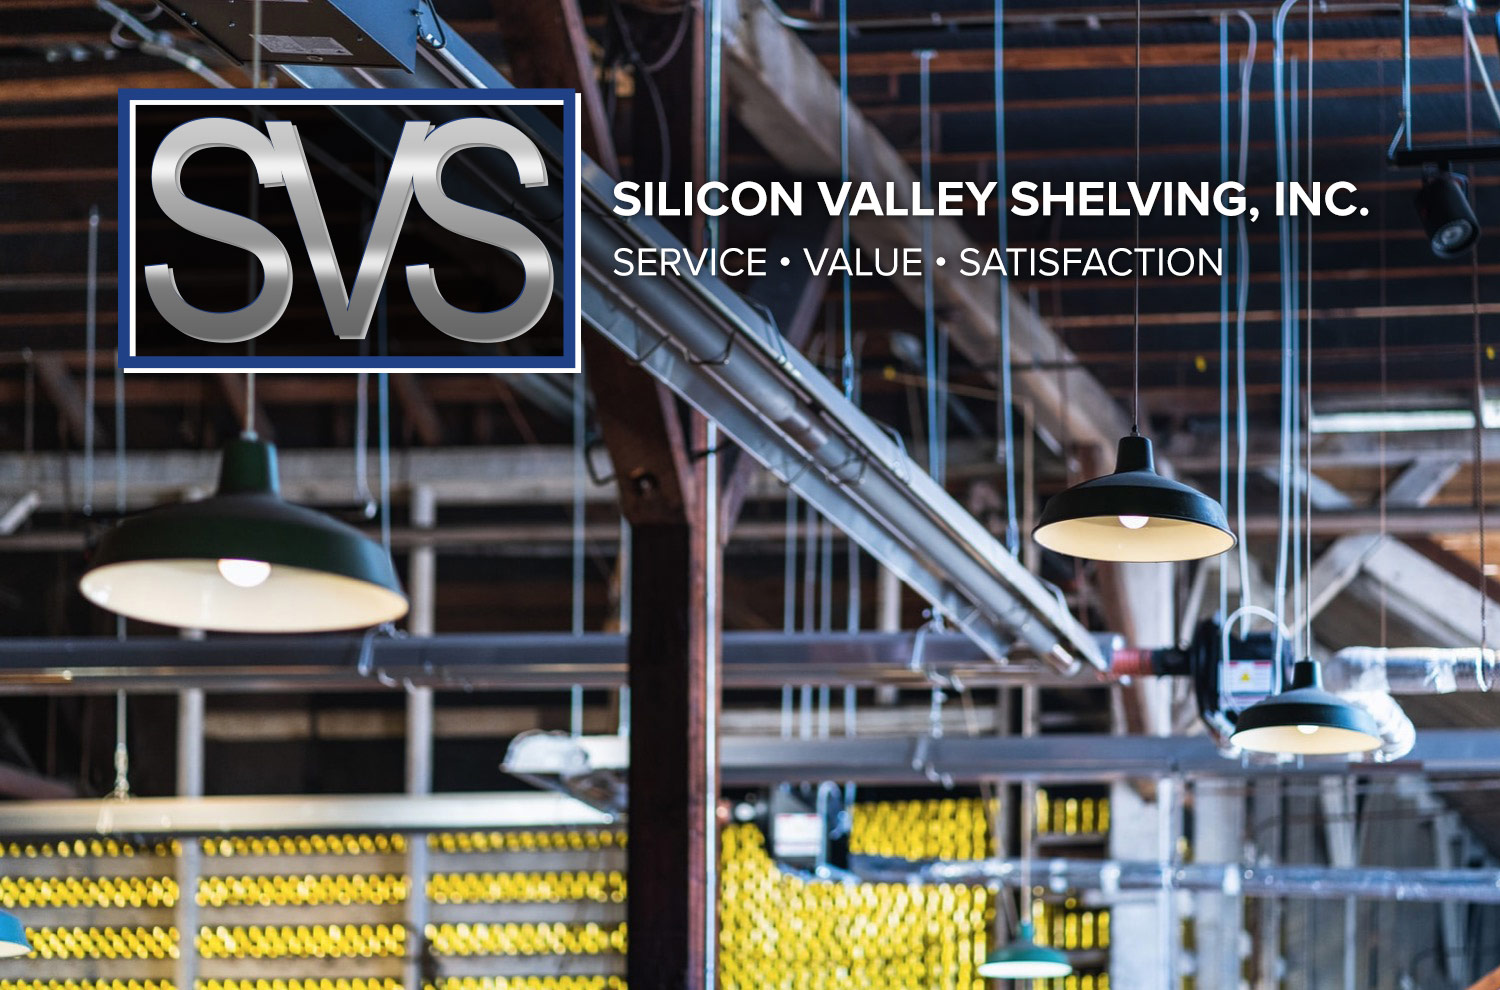 A warehouse with SVS logo